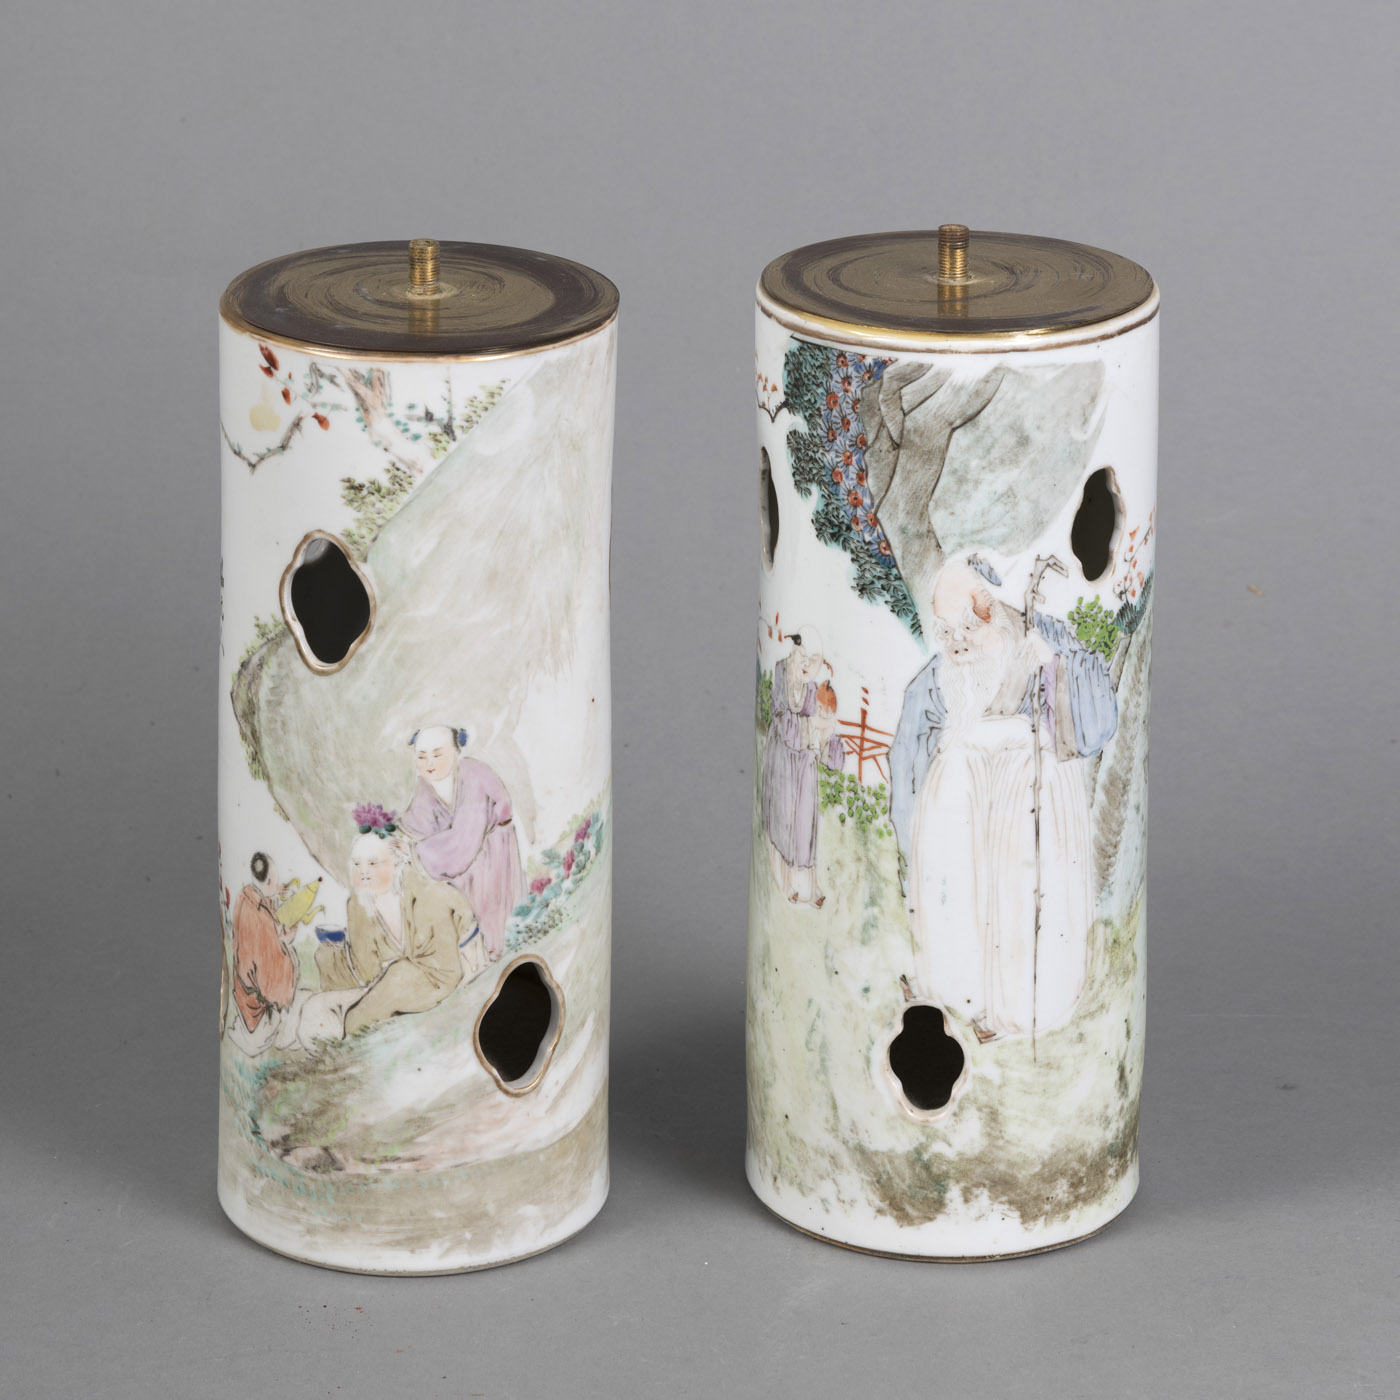 TWO CYLINDRICAL PORCELAIN HAT STANDS WITH FOUR-PASS OPENINGS AND 'FAMILLE ROSE' FIGURE DECORATION